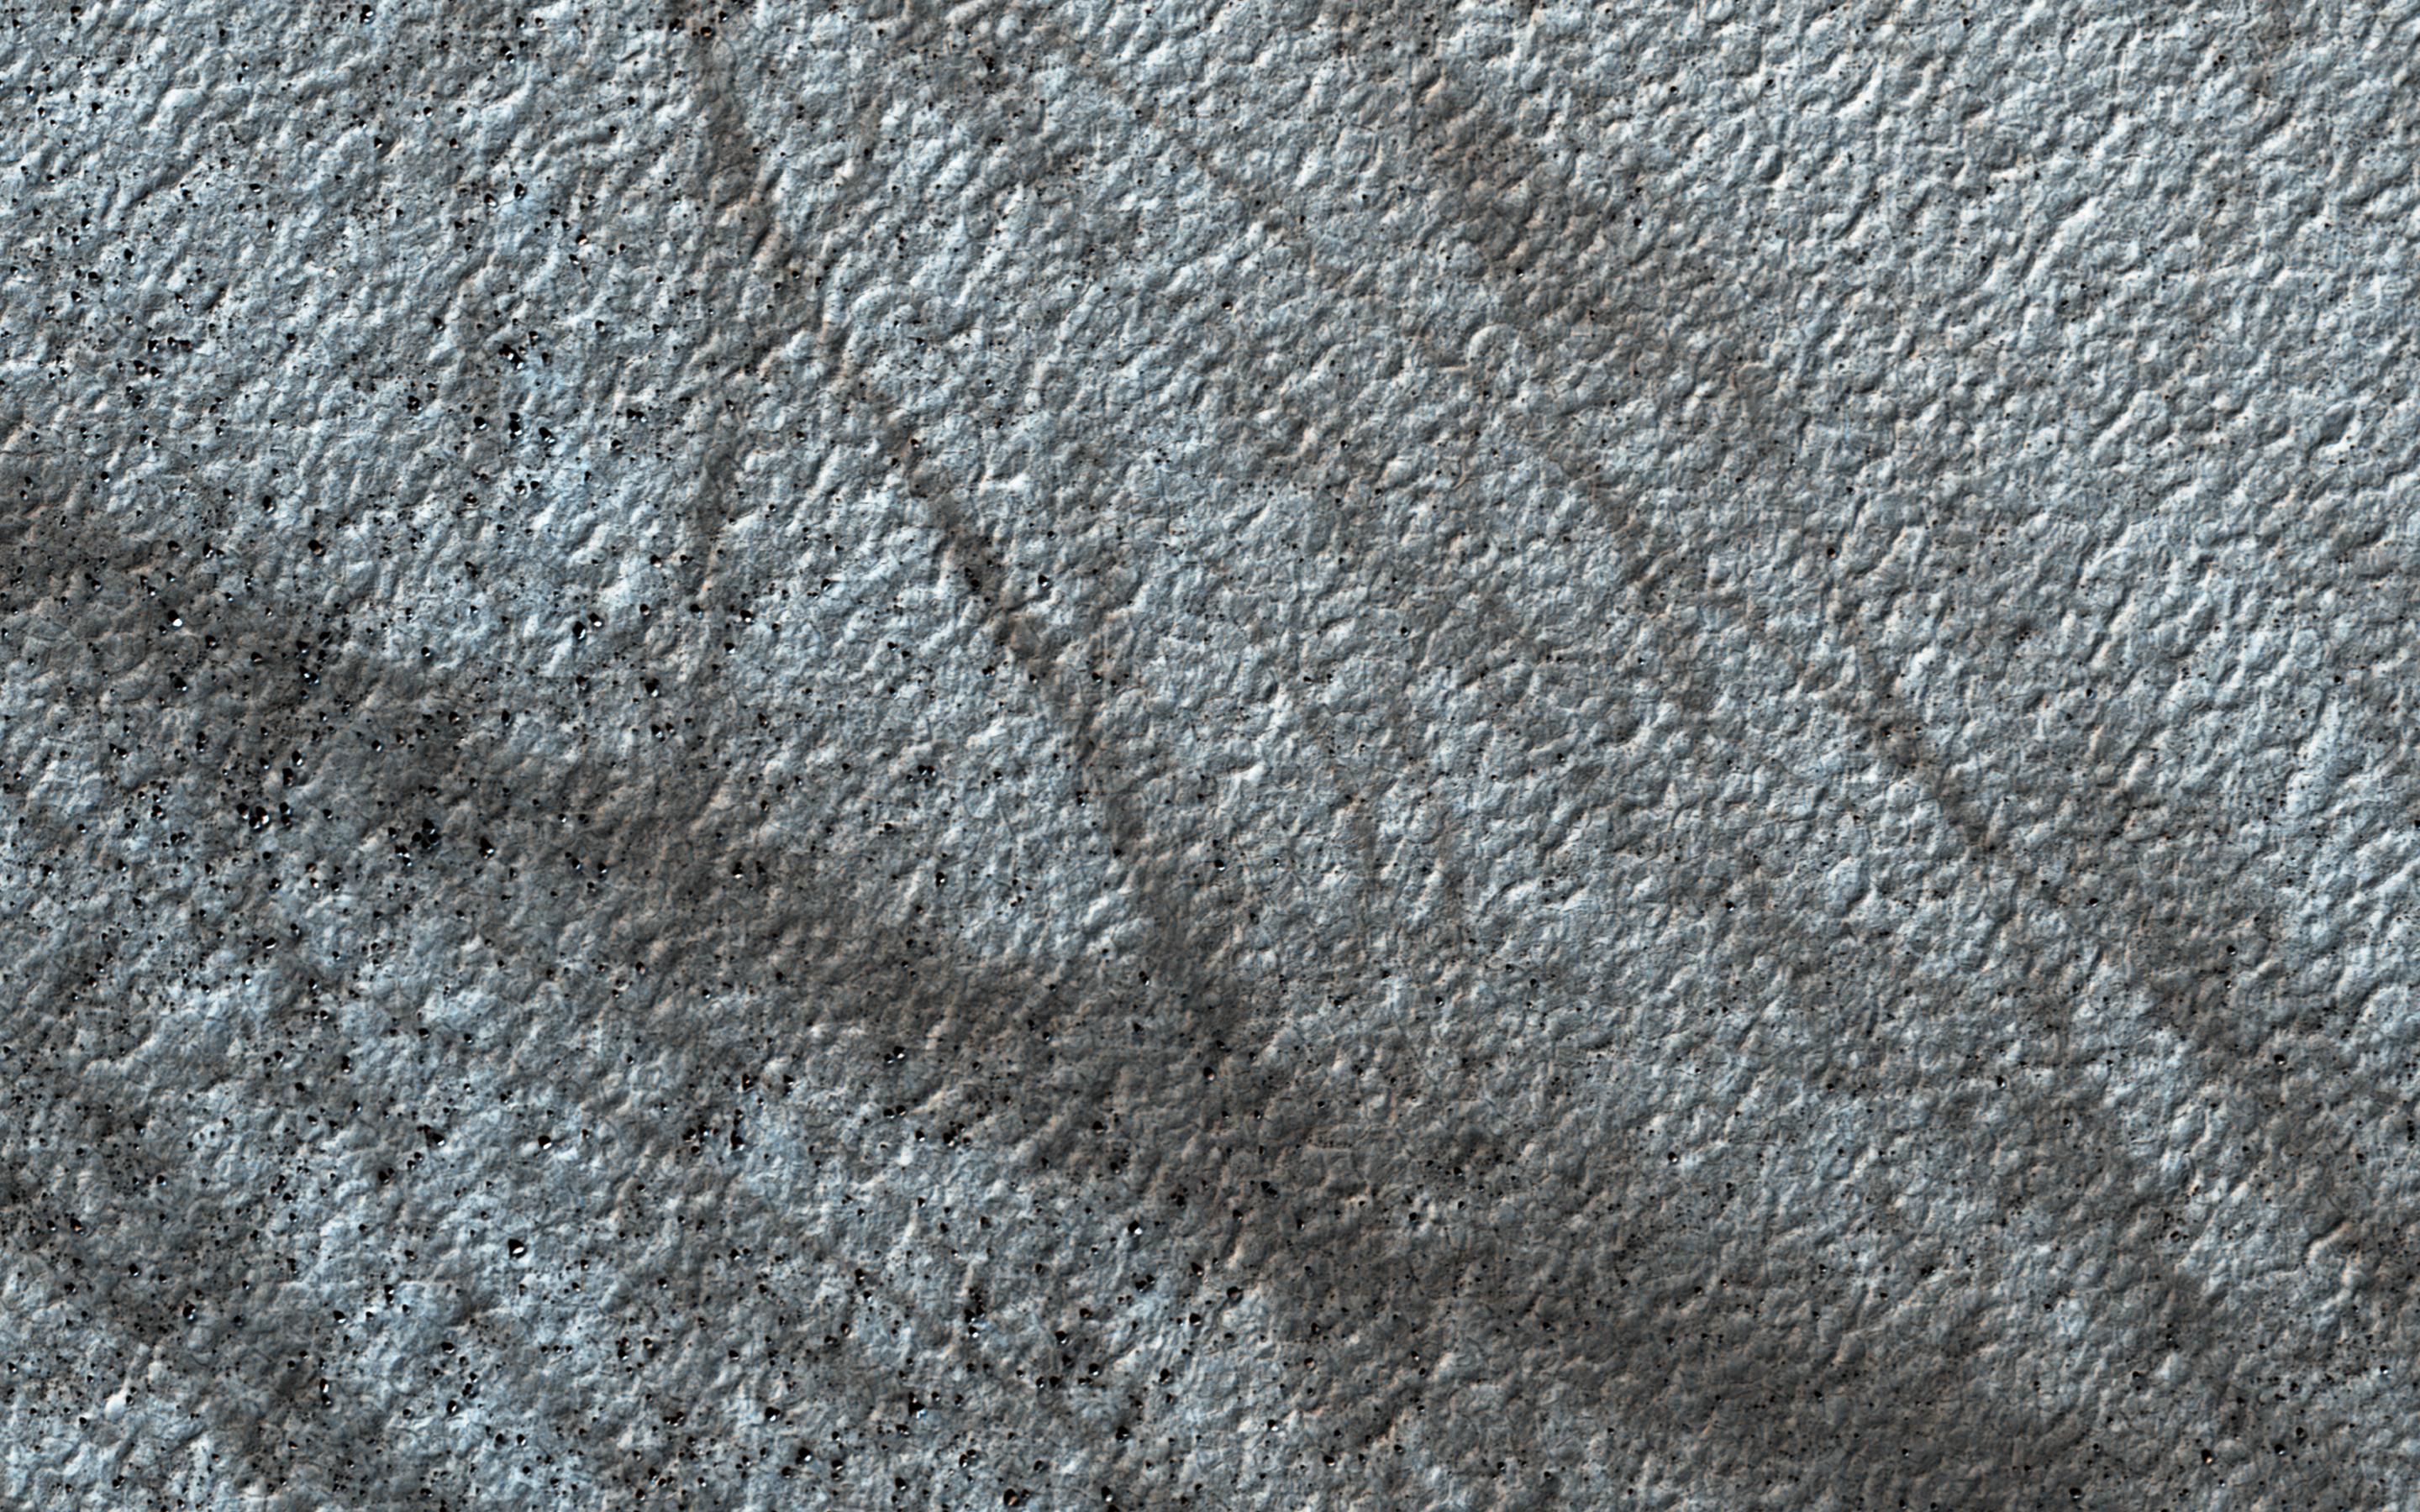 This image acquired on January 13, 2019 by NASAs Mars Reconnaissance Orbiter, shows a cluster of dust devil tracks on the flat ground below the south polar layered deposits, but none on the layers themselves.